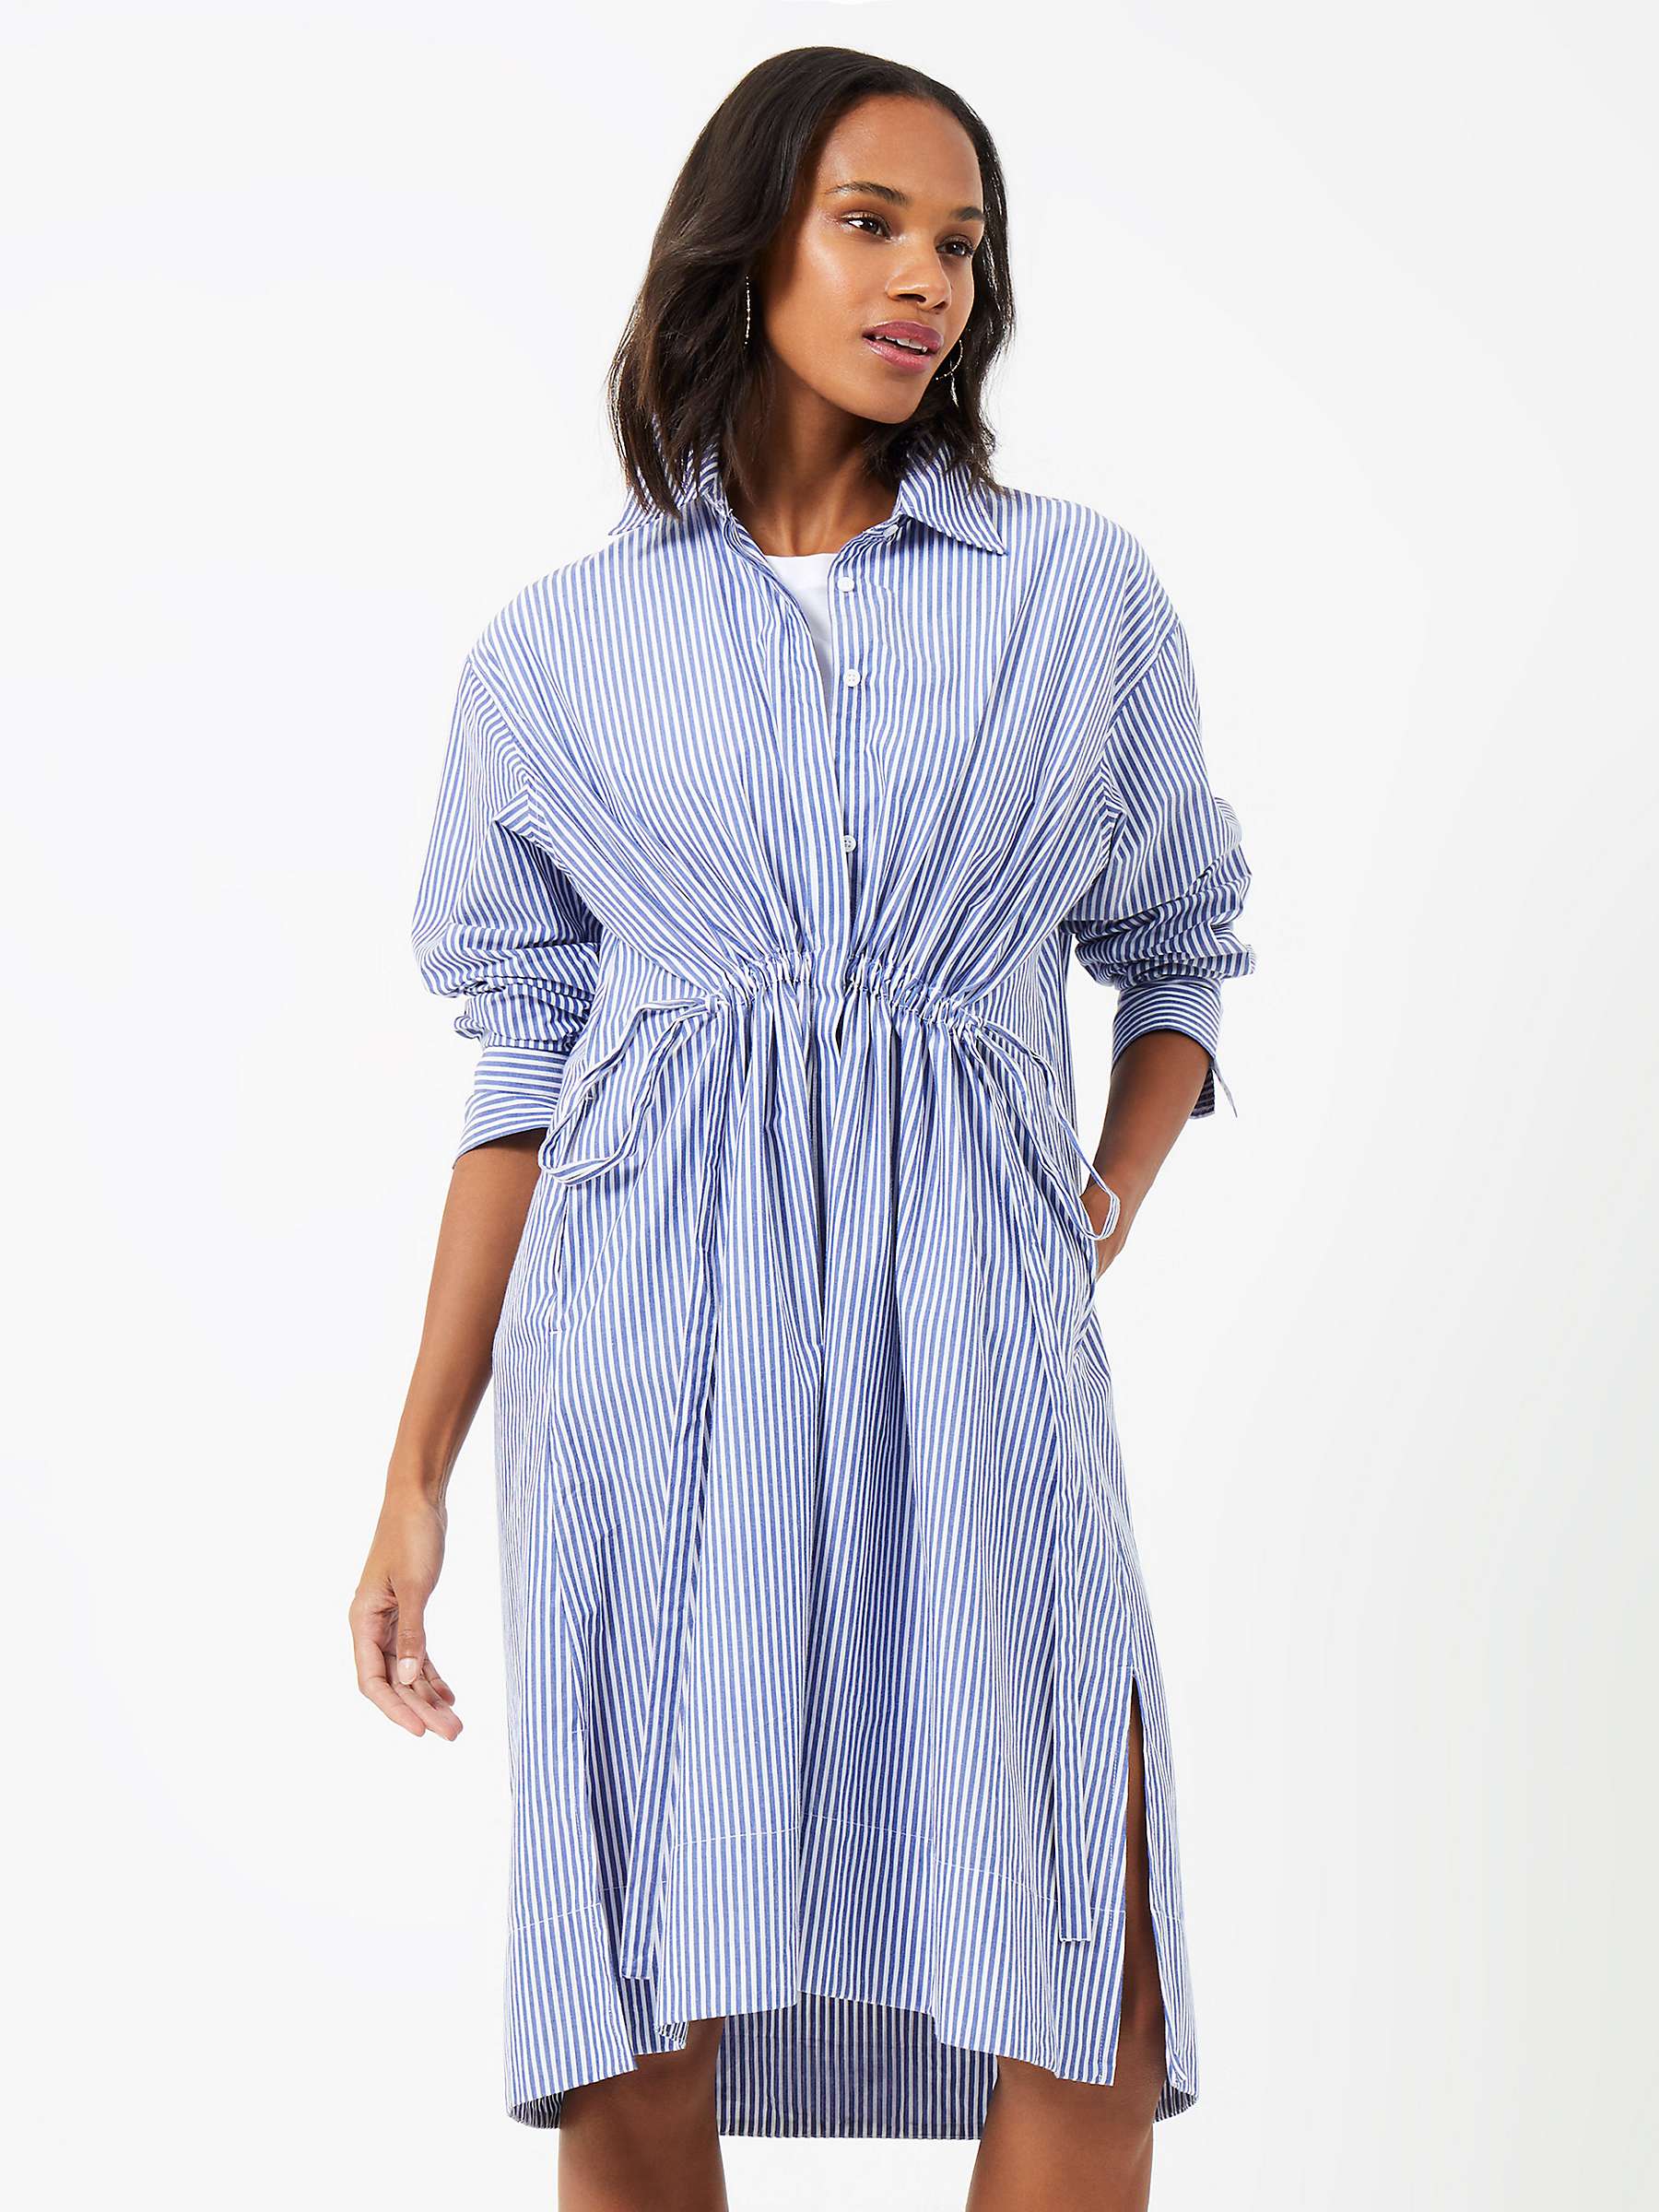 Buy French Connection Rhodes Stripe Shirt Dress, Blue/White Online at johnlewis.com